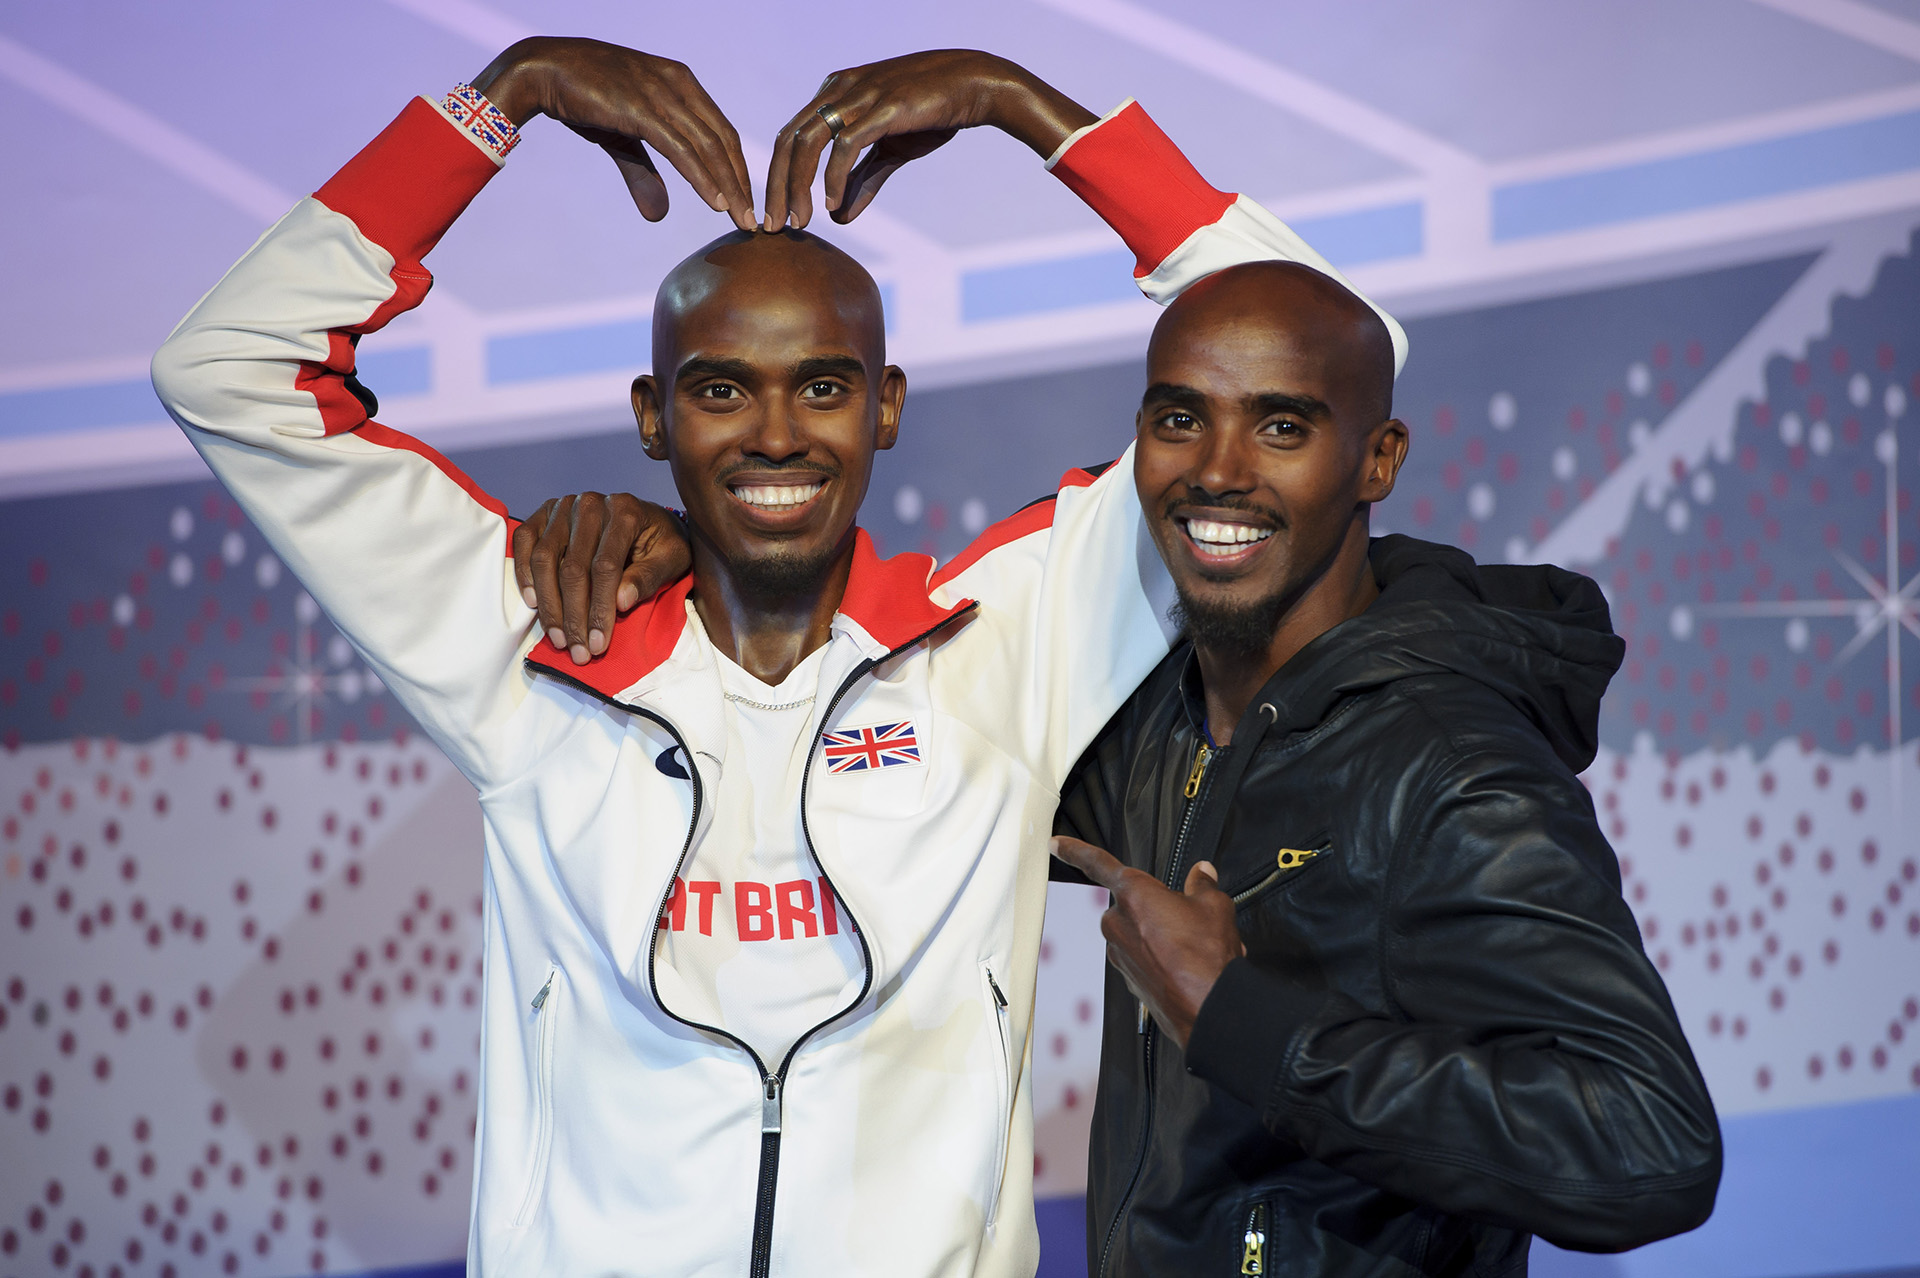 Mo Farah with his own figure at Madame Tussauds London